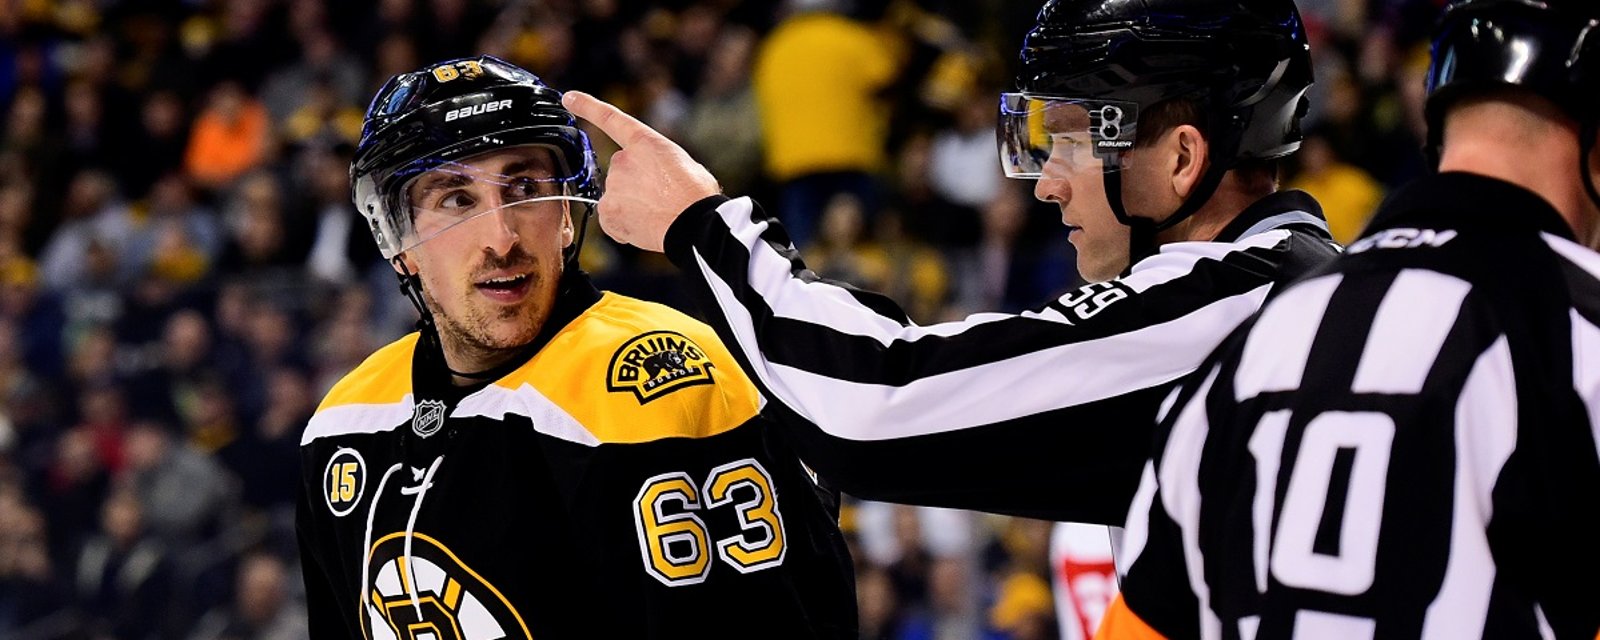 Rookie forward may soon dethrone Brad Marchand as most hated player in the NHL.